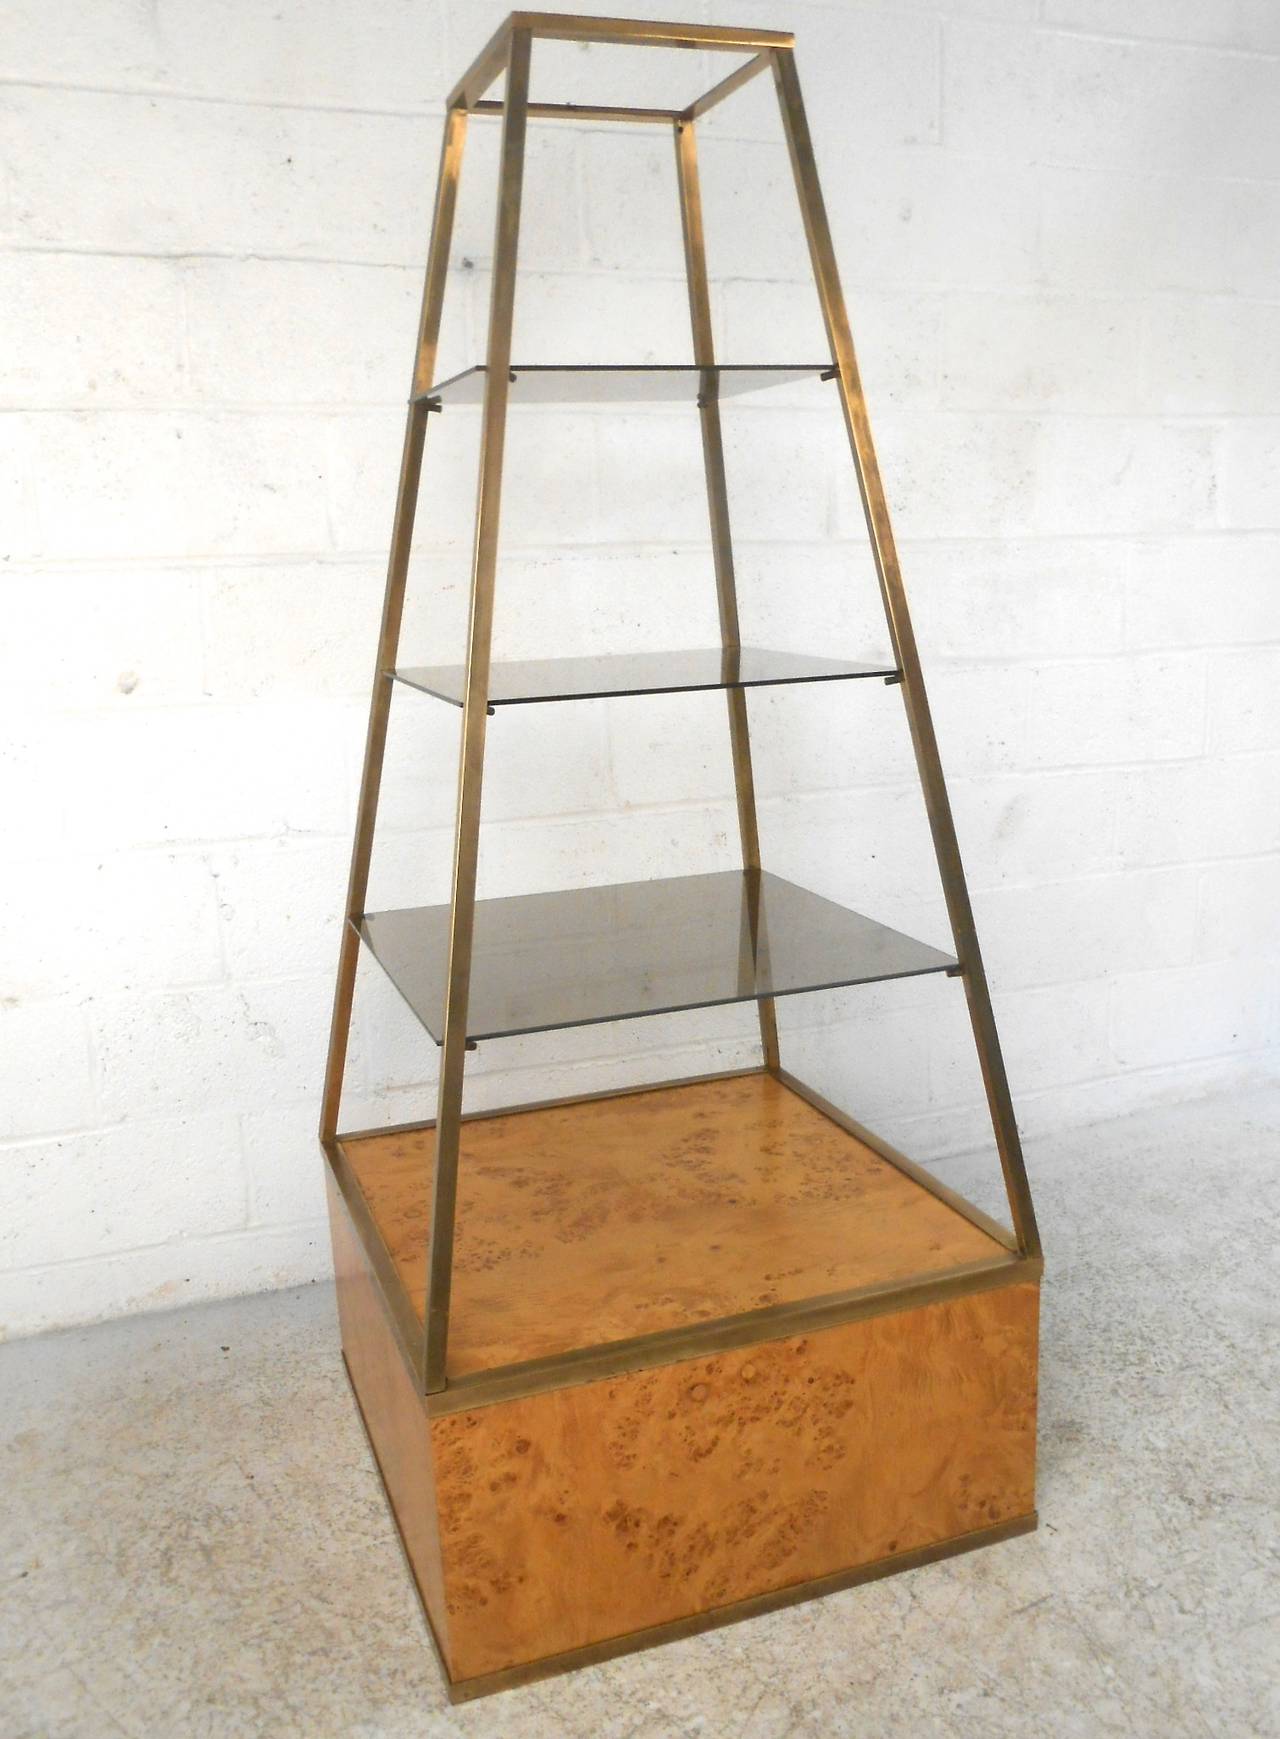 This unique vintage display unit features a wonderful Baughman style burl wood base, with pyramid style fixture housing three smoked glass shelves. Perfect for unique home or shop display. Please confirm item location (NY or NJ).